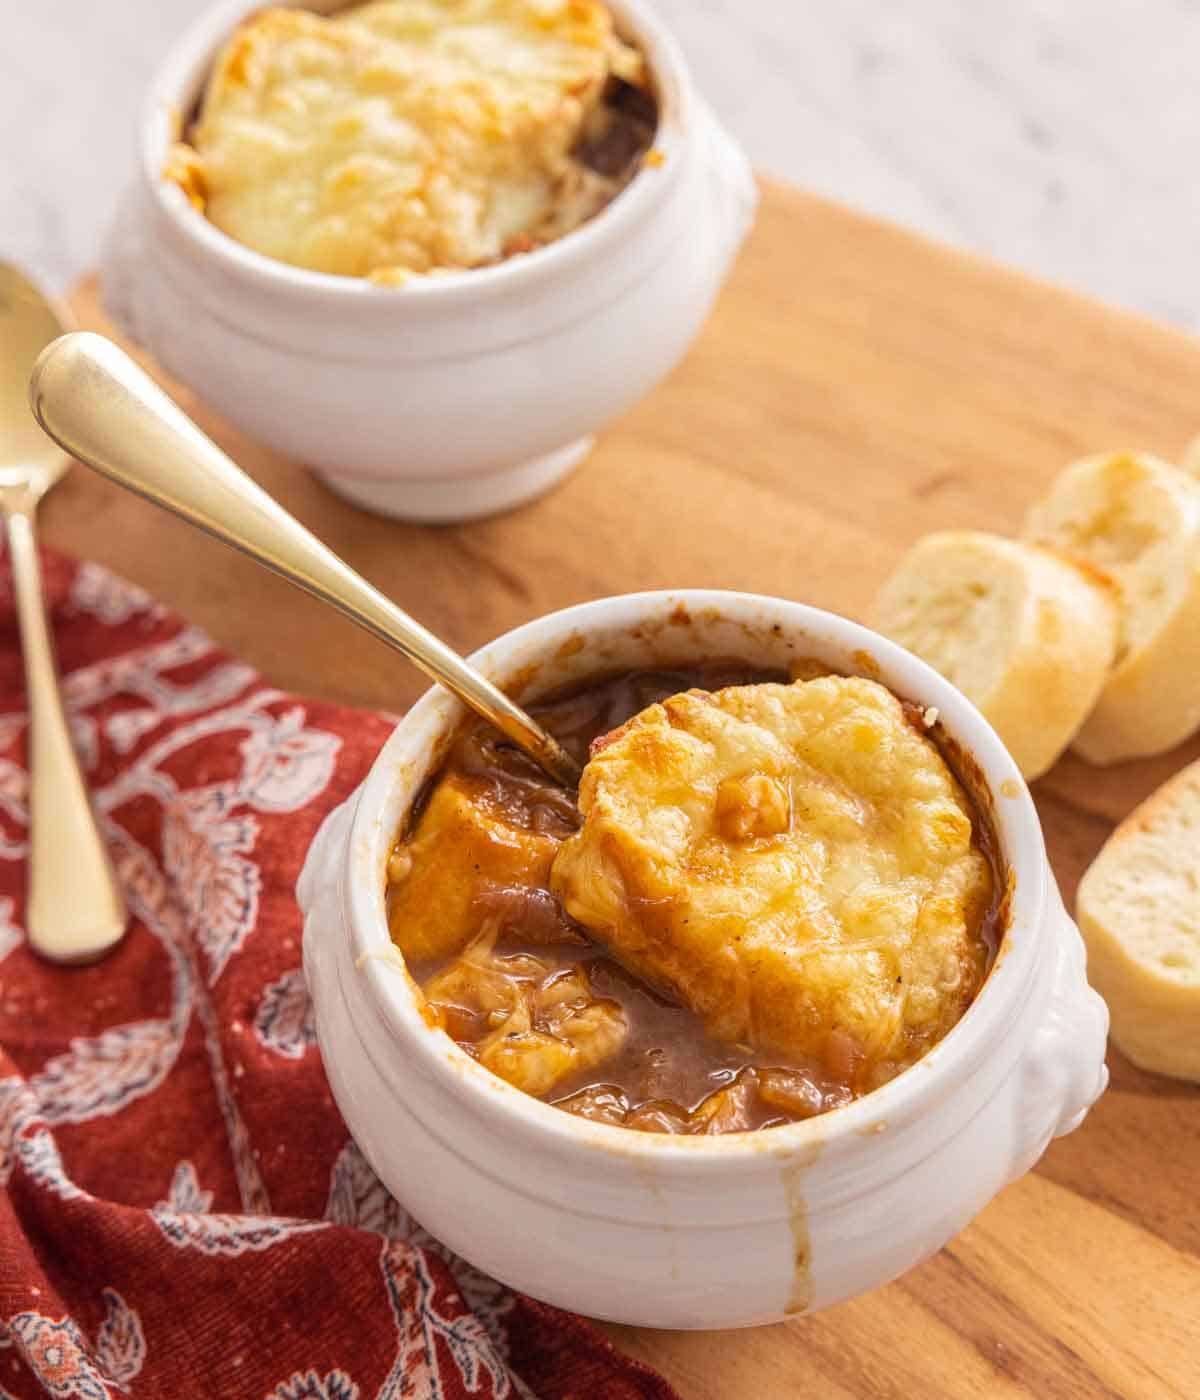 A bowl of French onion soup with a spoon inserted and sliced baguettes in the background.